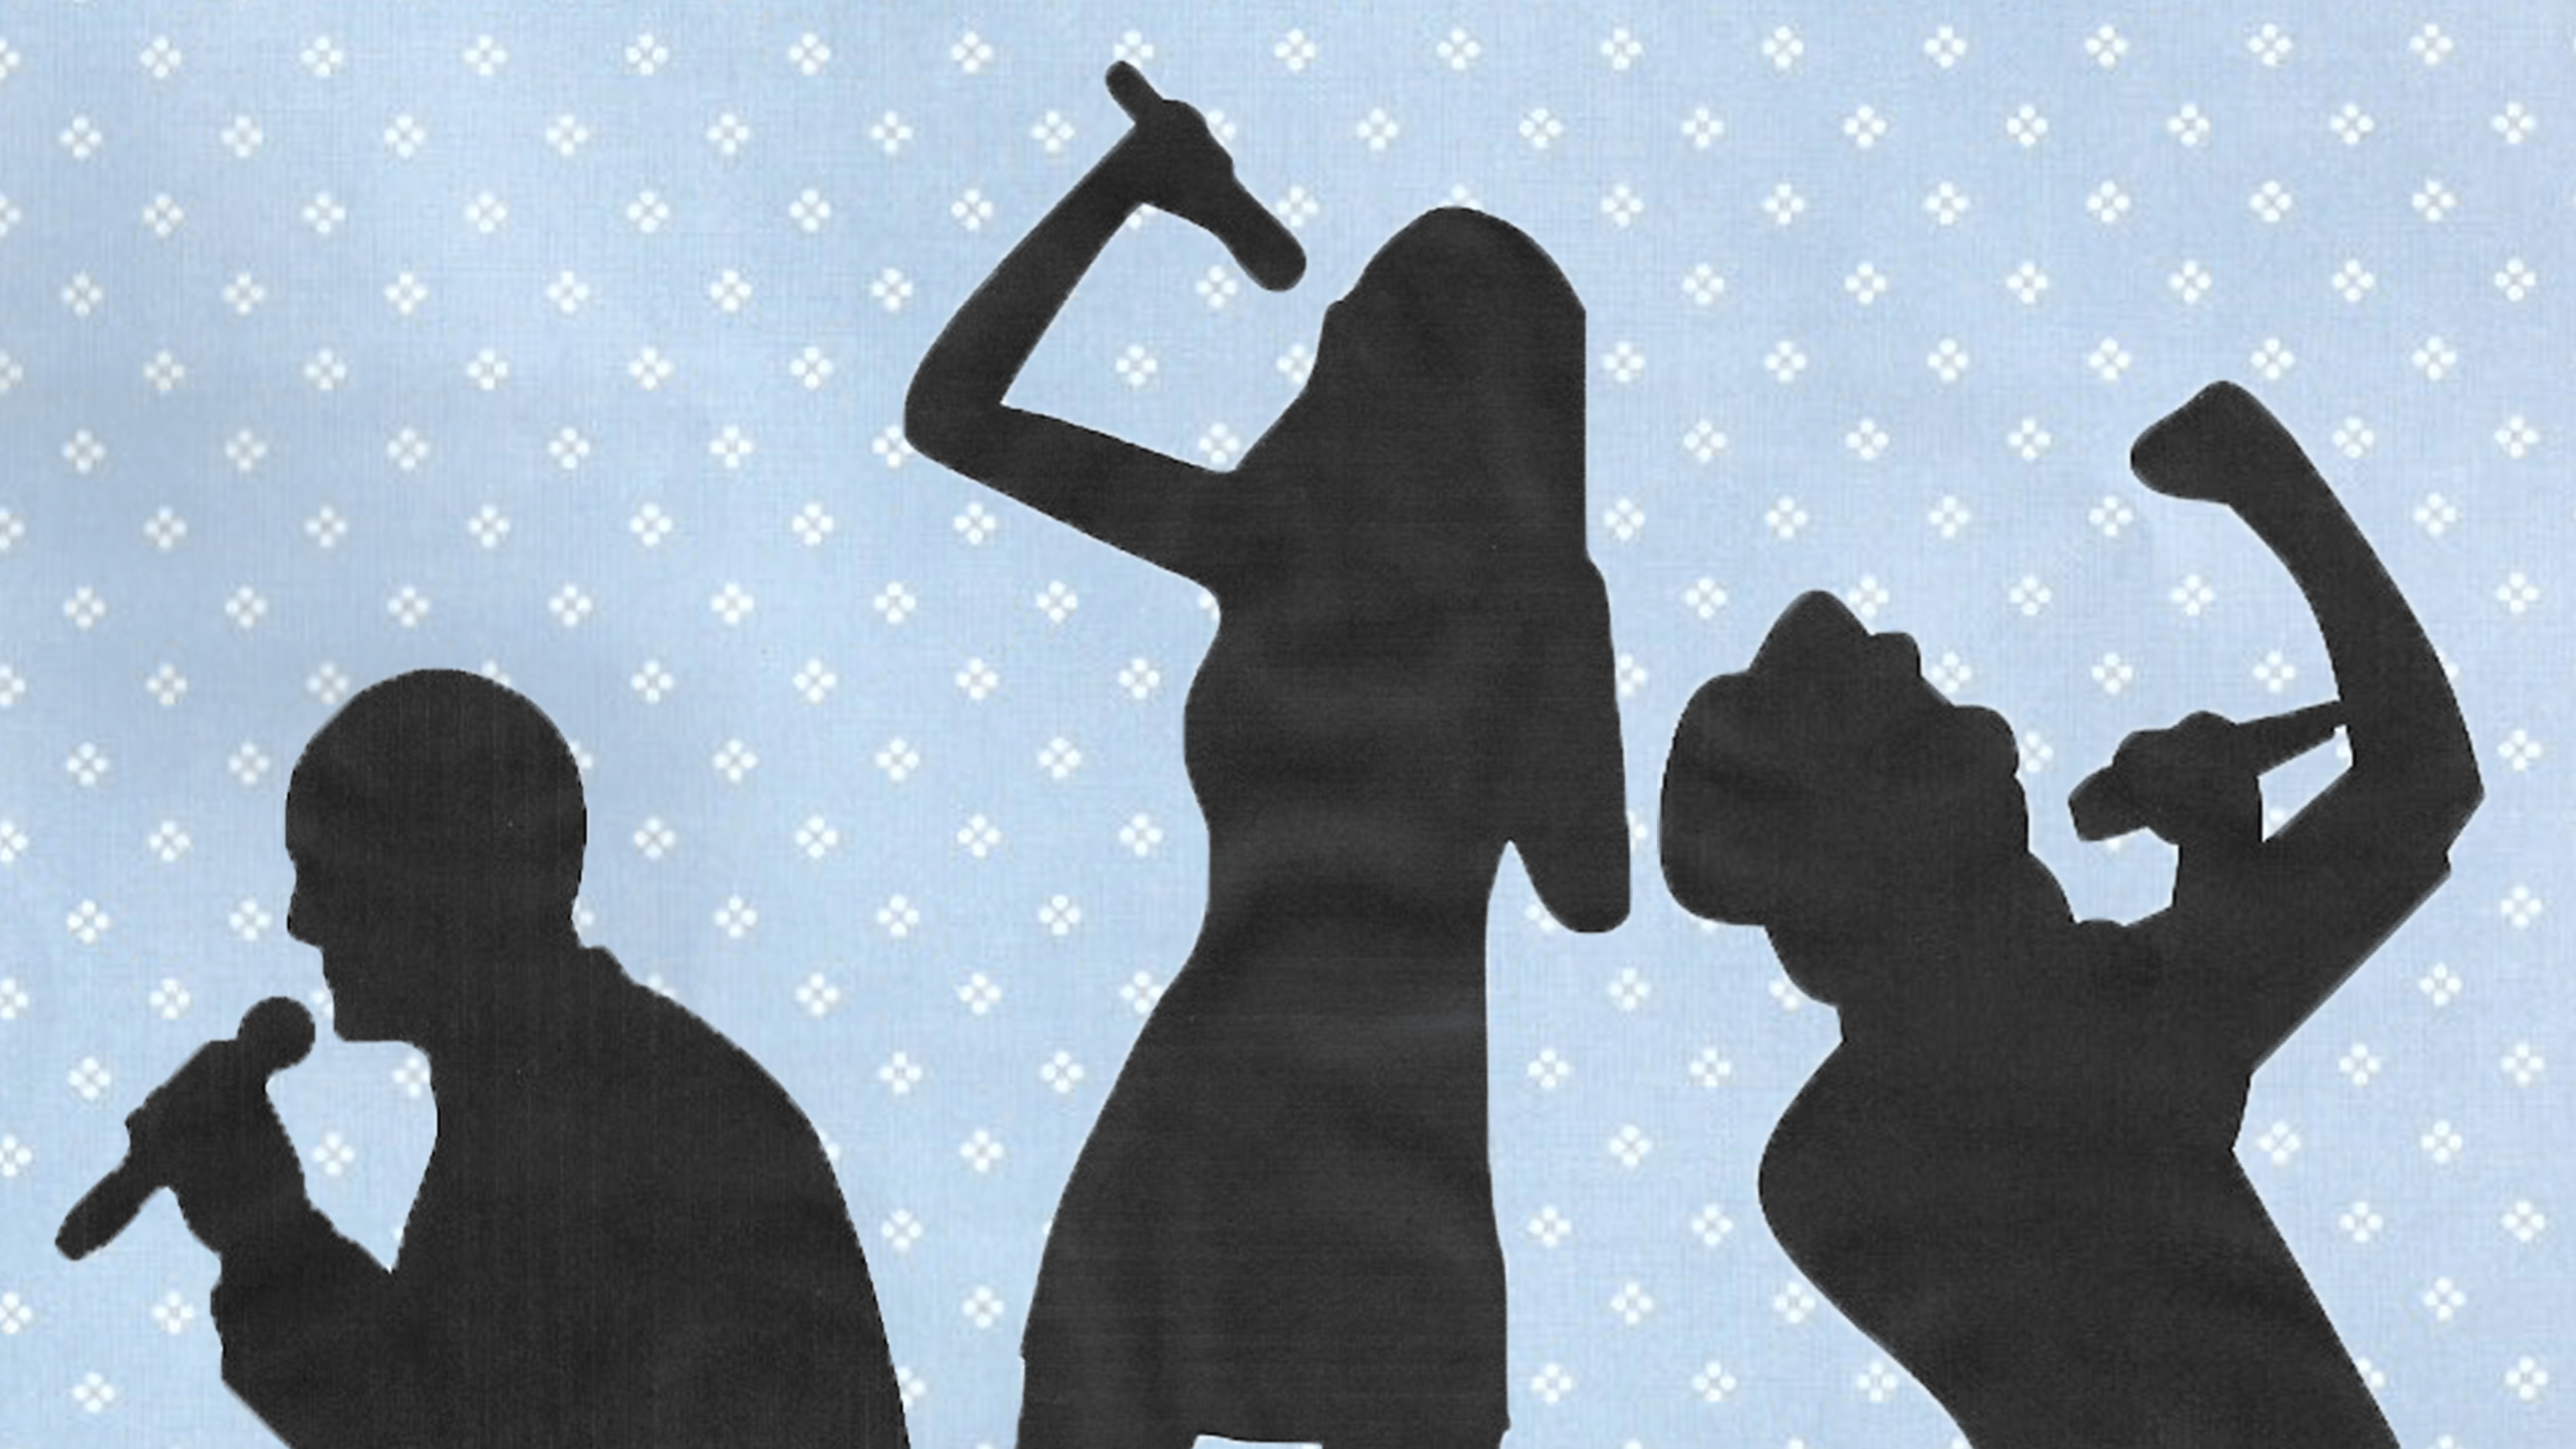 Silhouettes of singers against a blue polka dot background.